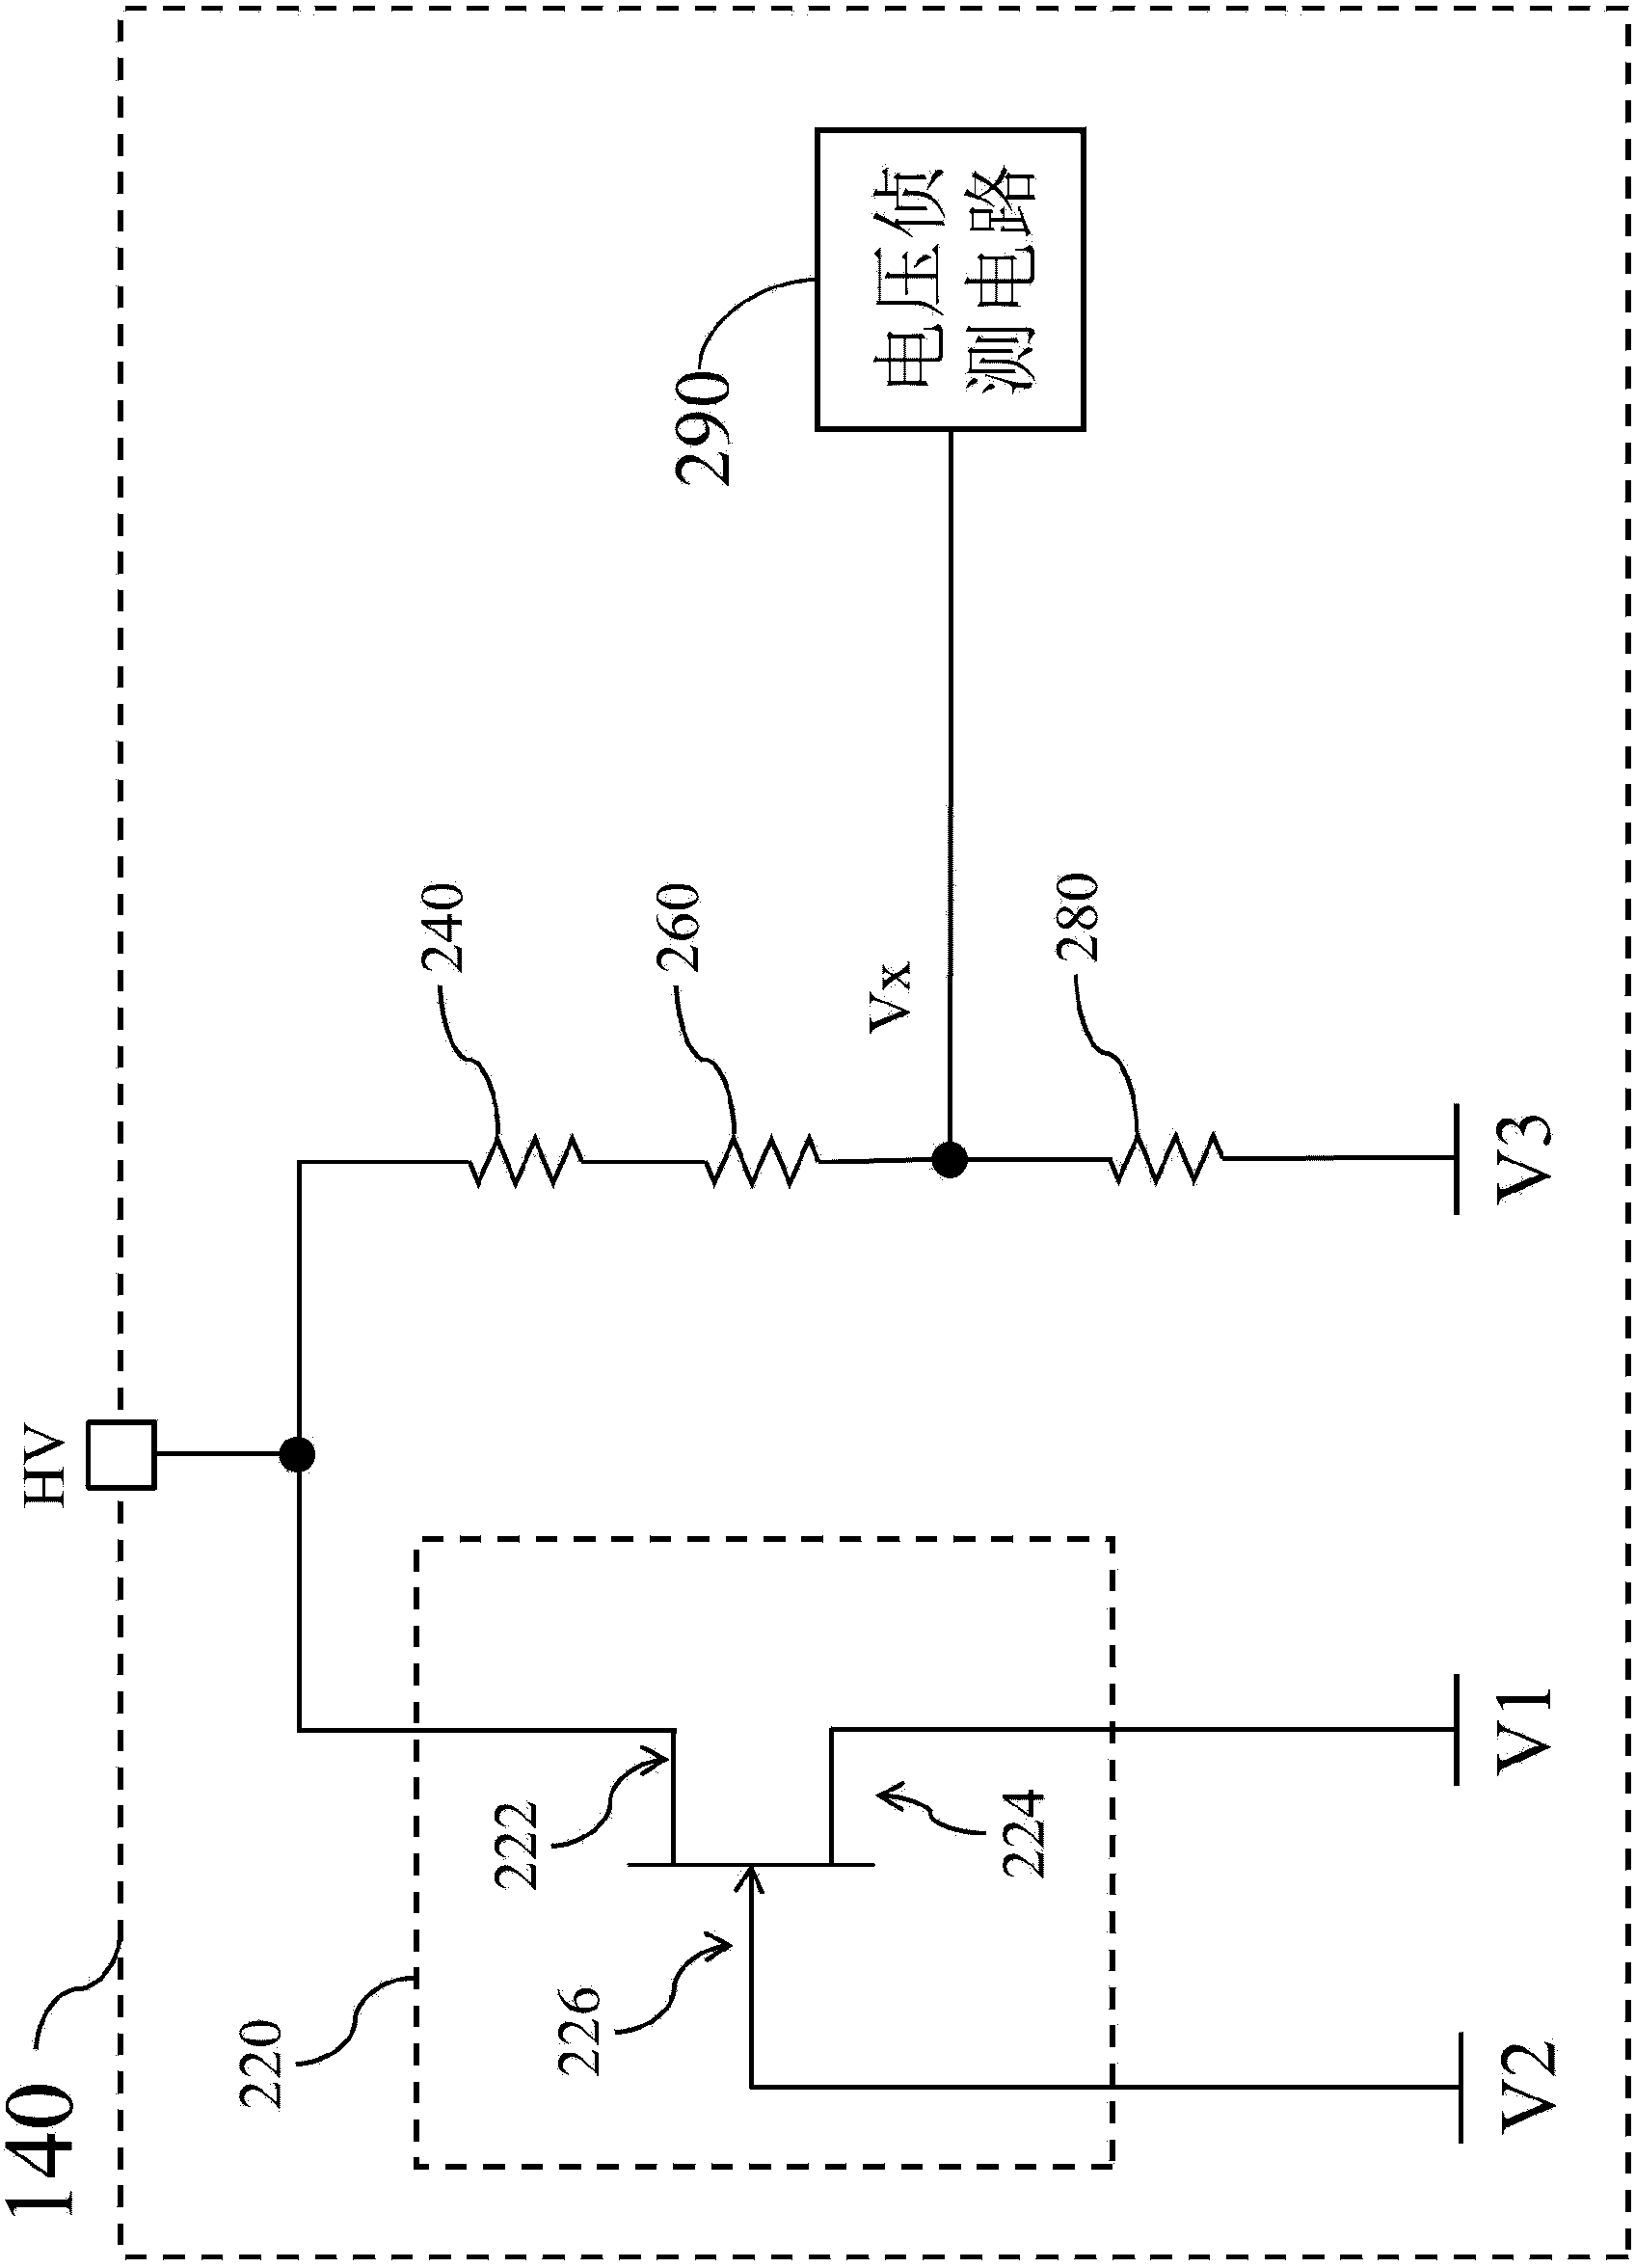 Control circuit of alternating current-to-direct current converter